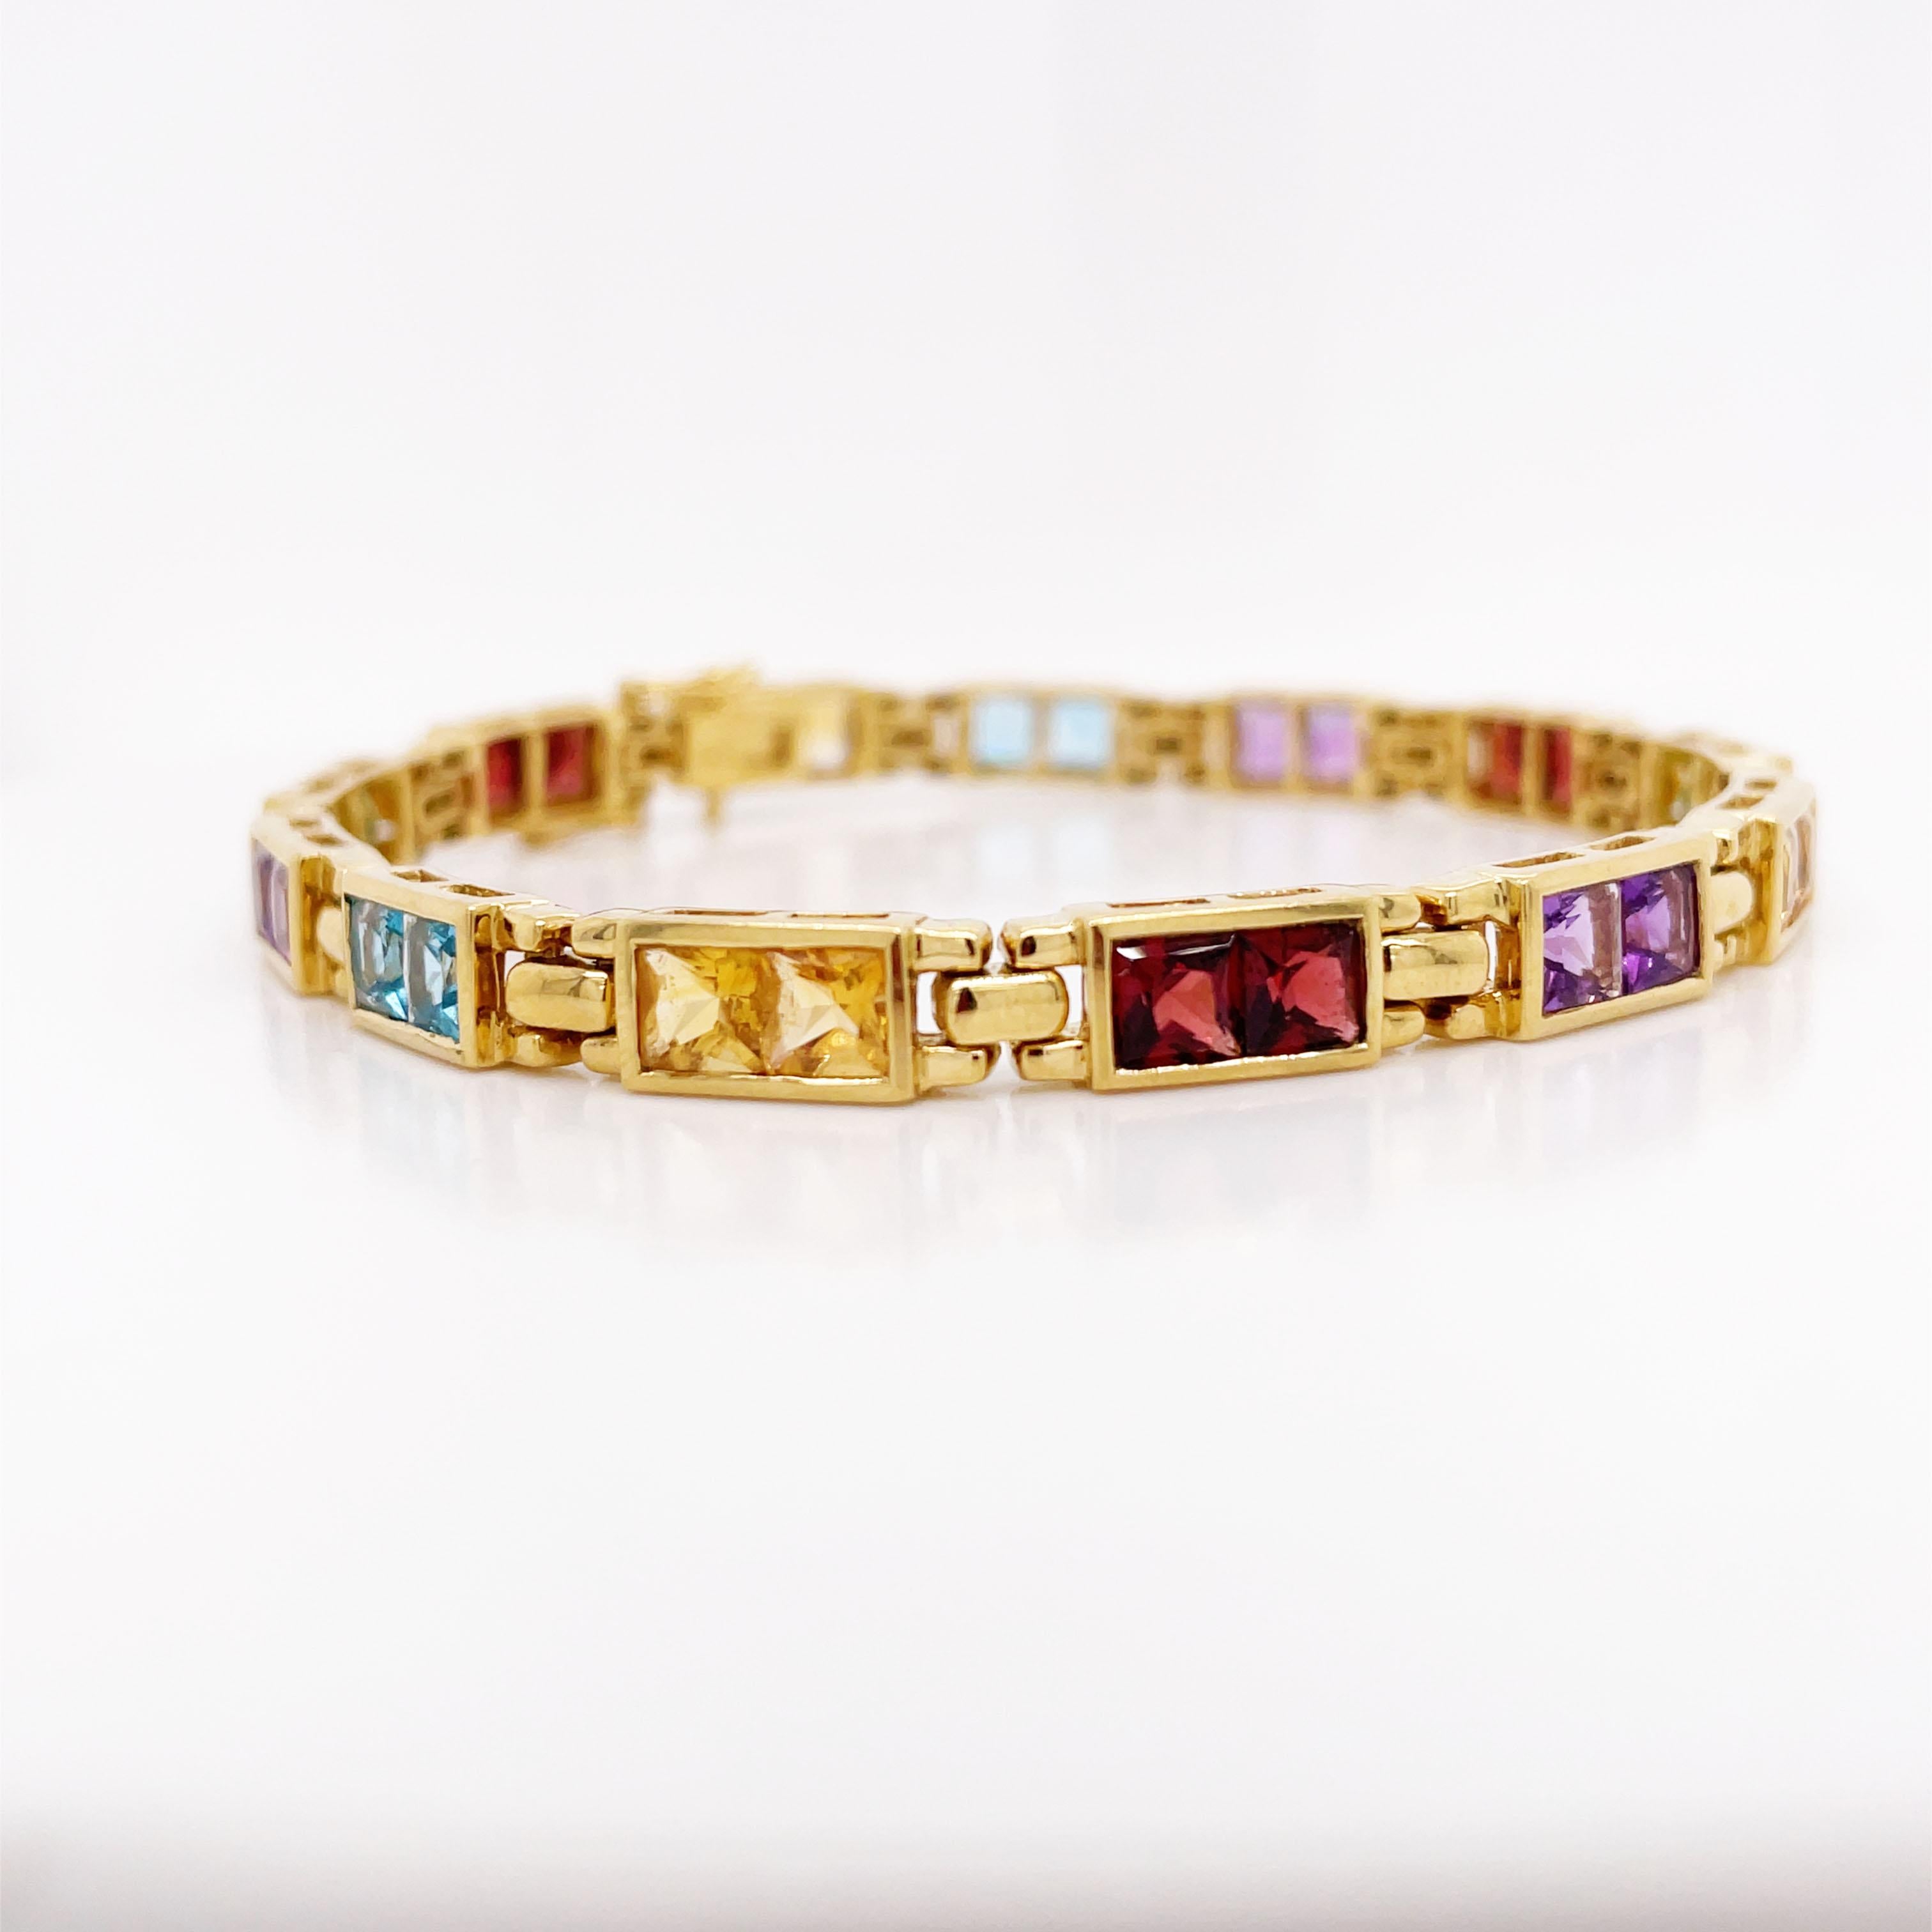 This is a splendid Contemporary line bracelet set in 18K yellow gold featuring a gorgeous array of beautiful colored gemstones! This bracelet is perfect for everyday wear and beautiful and colorful addition to your jewelry wardrobe! This line